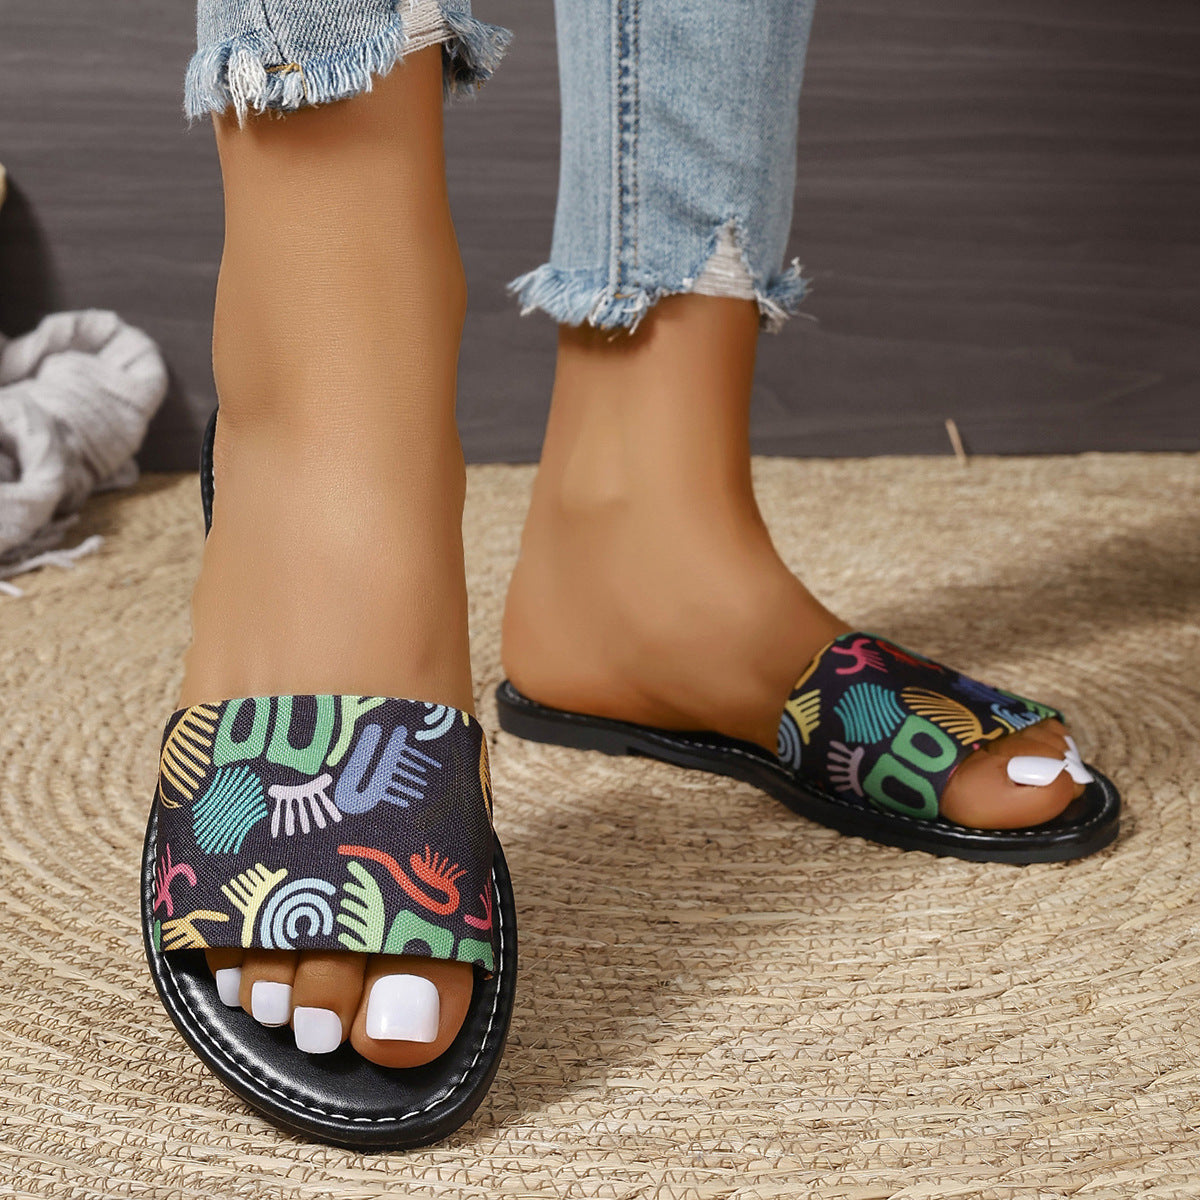 New Fashion Graffiti Print Sandals For Women Summer Round Toe Low Heel Flat Slippers For Women Slides Casual Beach Shoes